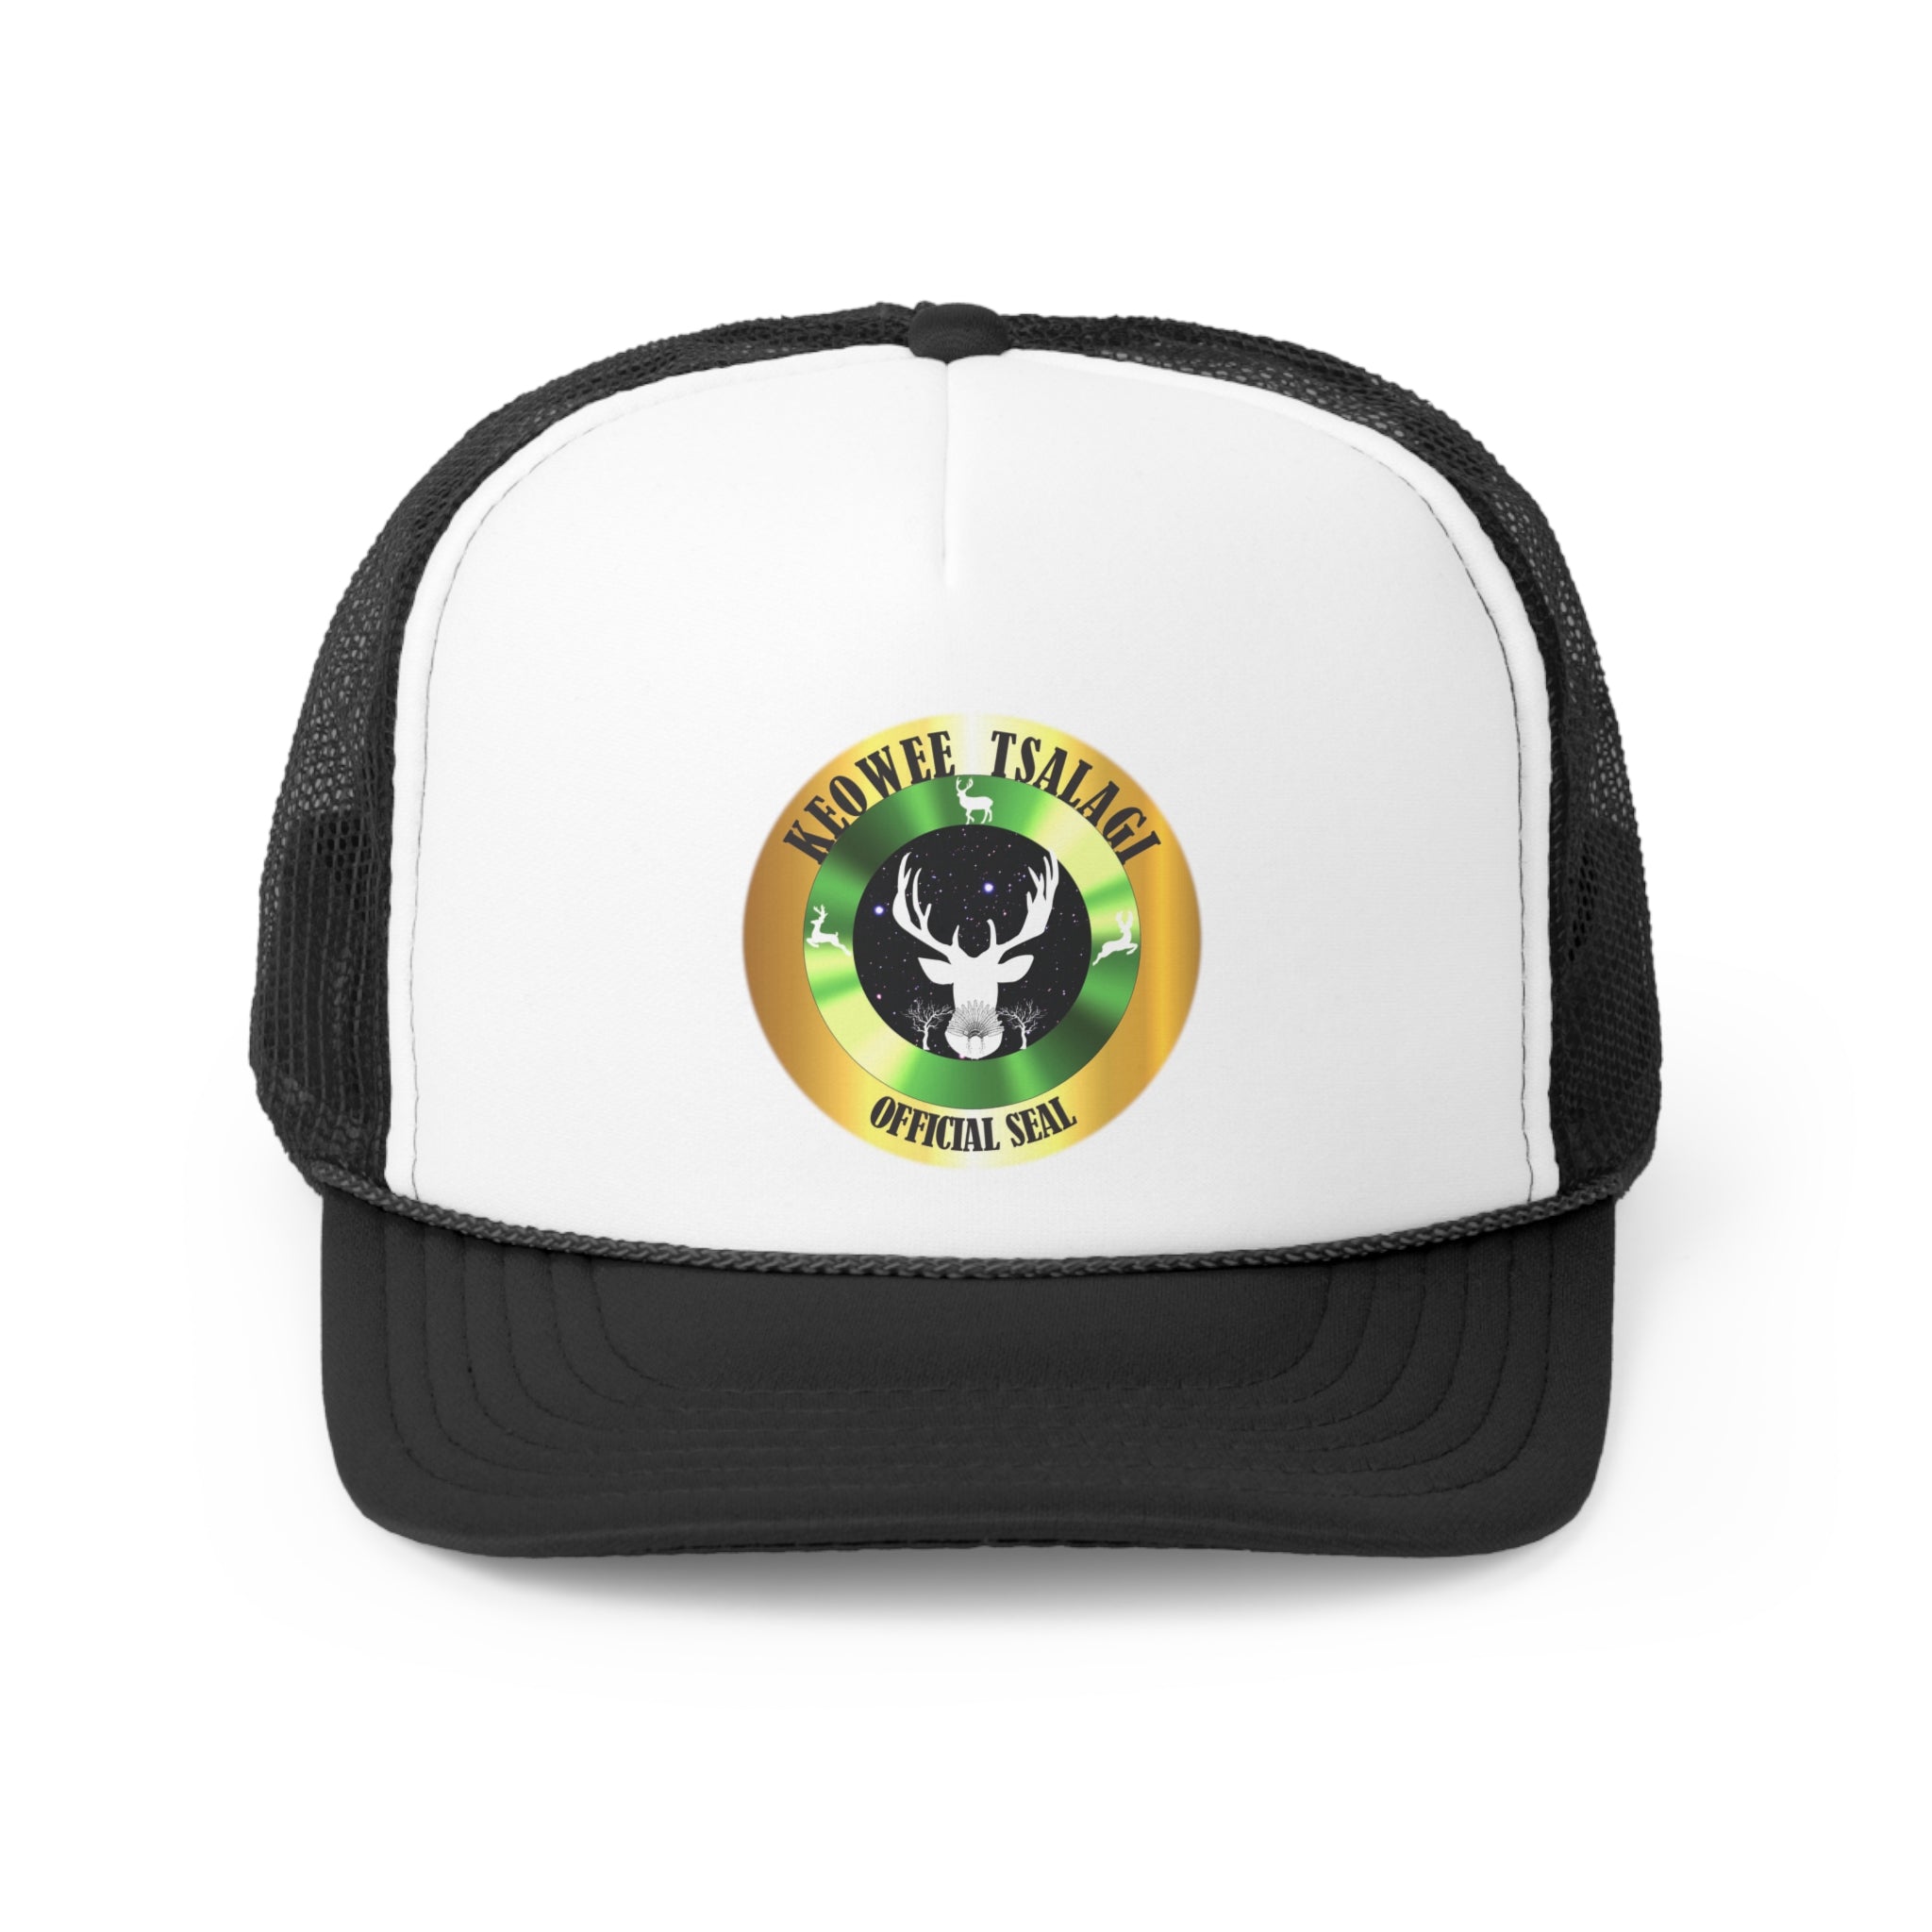 Trucker Hats for Men and Women Surfers, Fishermen, Divers Featuring Ulua or Gian Trevally